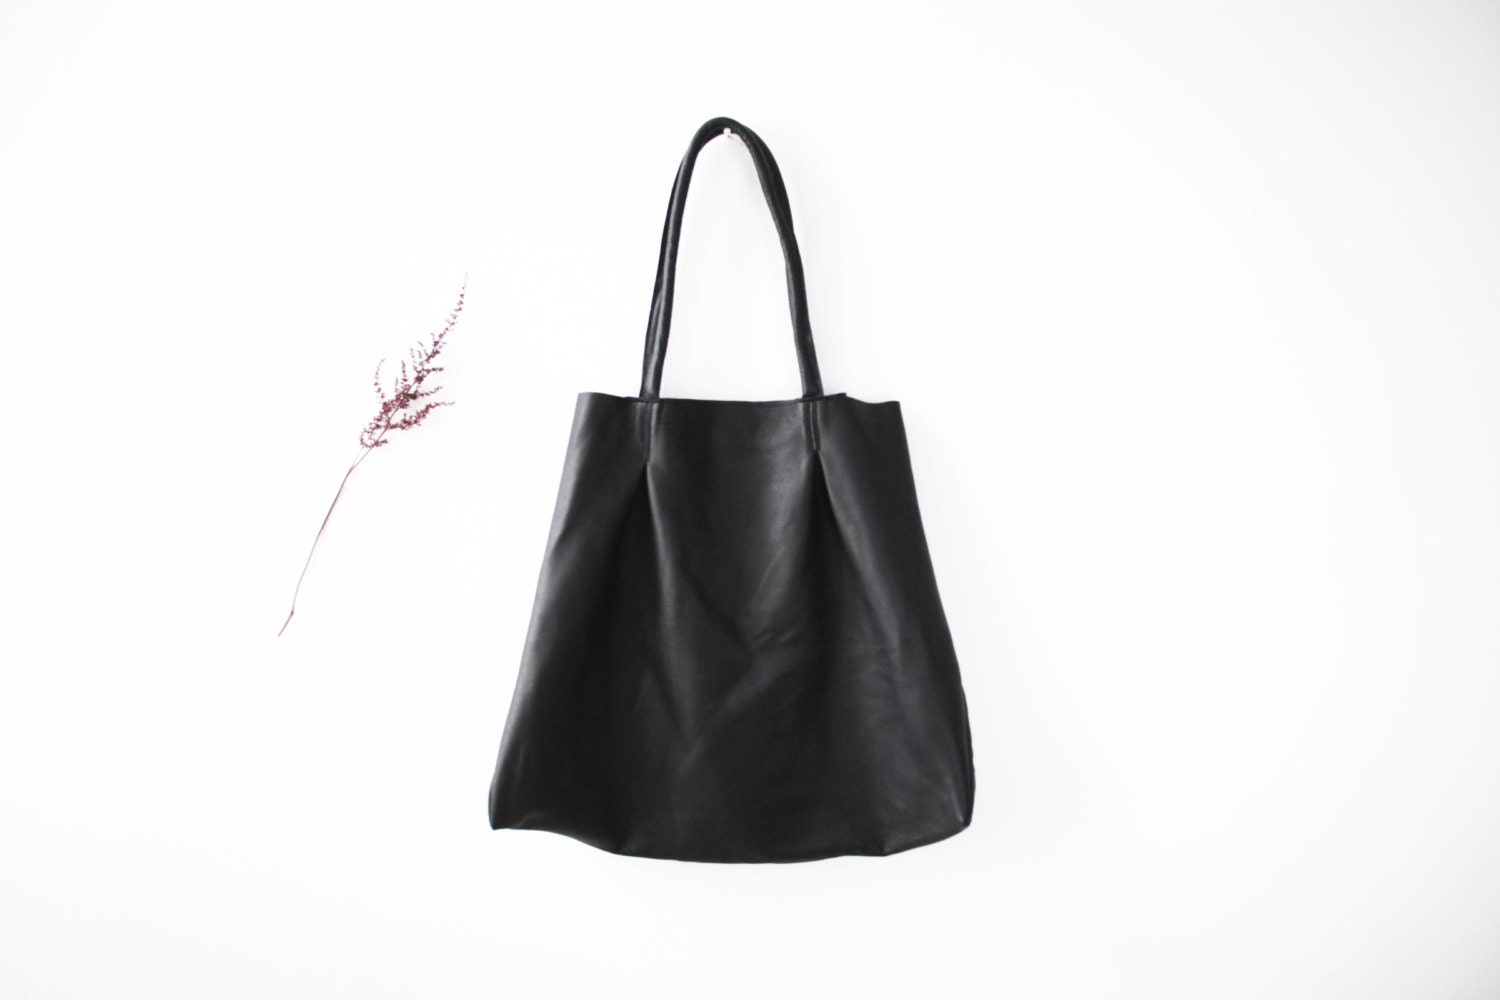 Black Leather Tote Bag Oversize Black Leather by thewhiteribbon